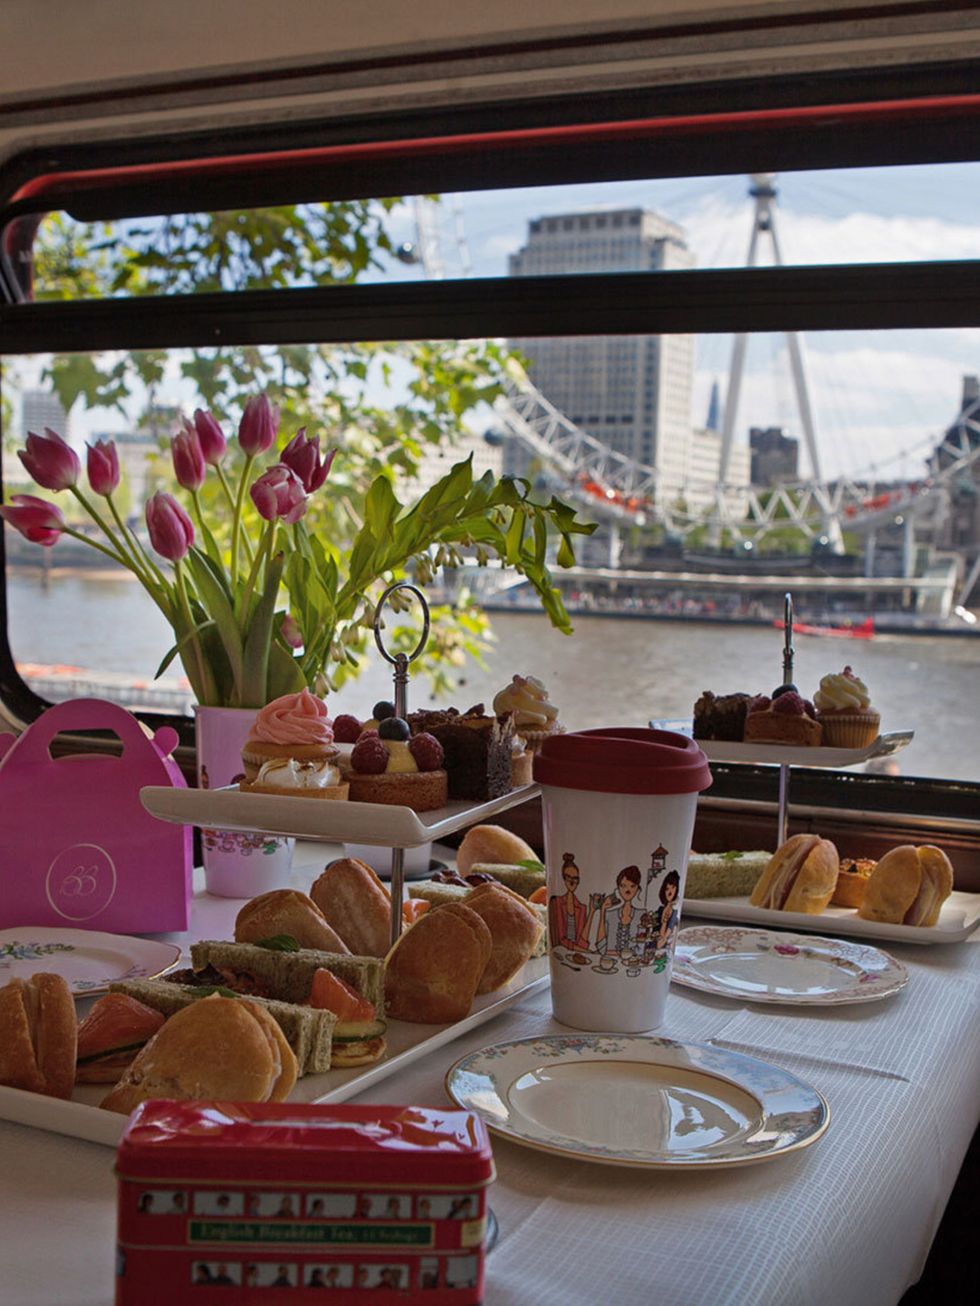 <p>FOOD AND DRINK: BB bakery Afternoon Tea Bus Tour</p><p>A charmingly irreverent variation on a very British theme, this recently launched concept bus tour is an original, utterly decadent way to see the city's sights.</p><p>Over the course of ninety min